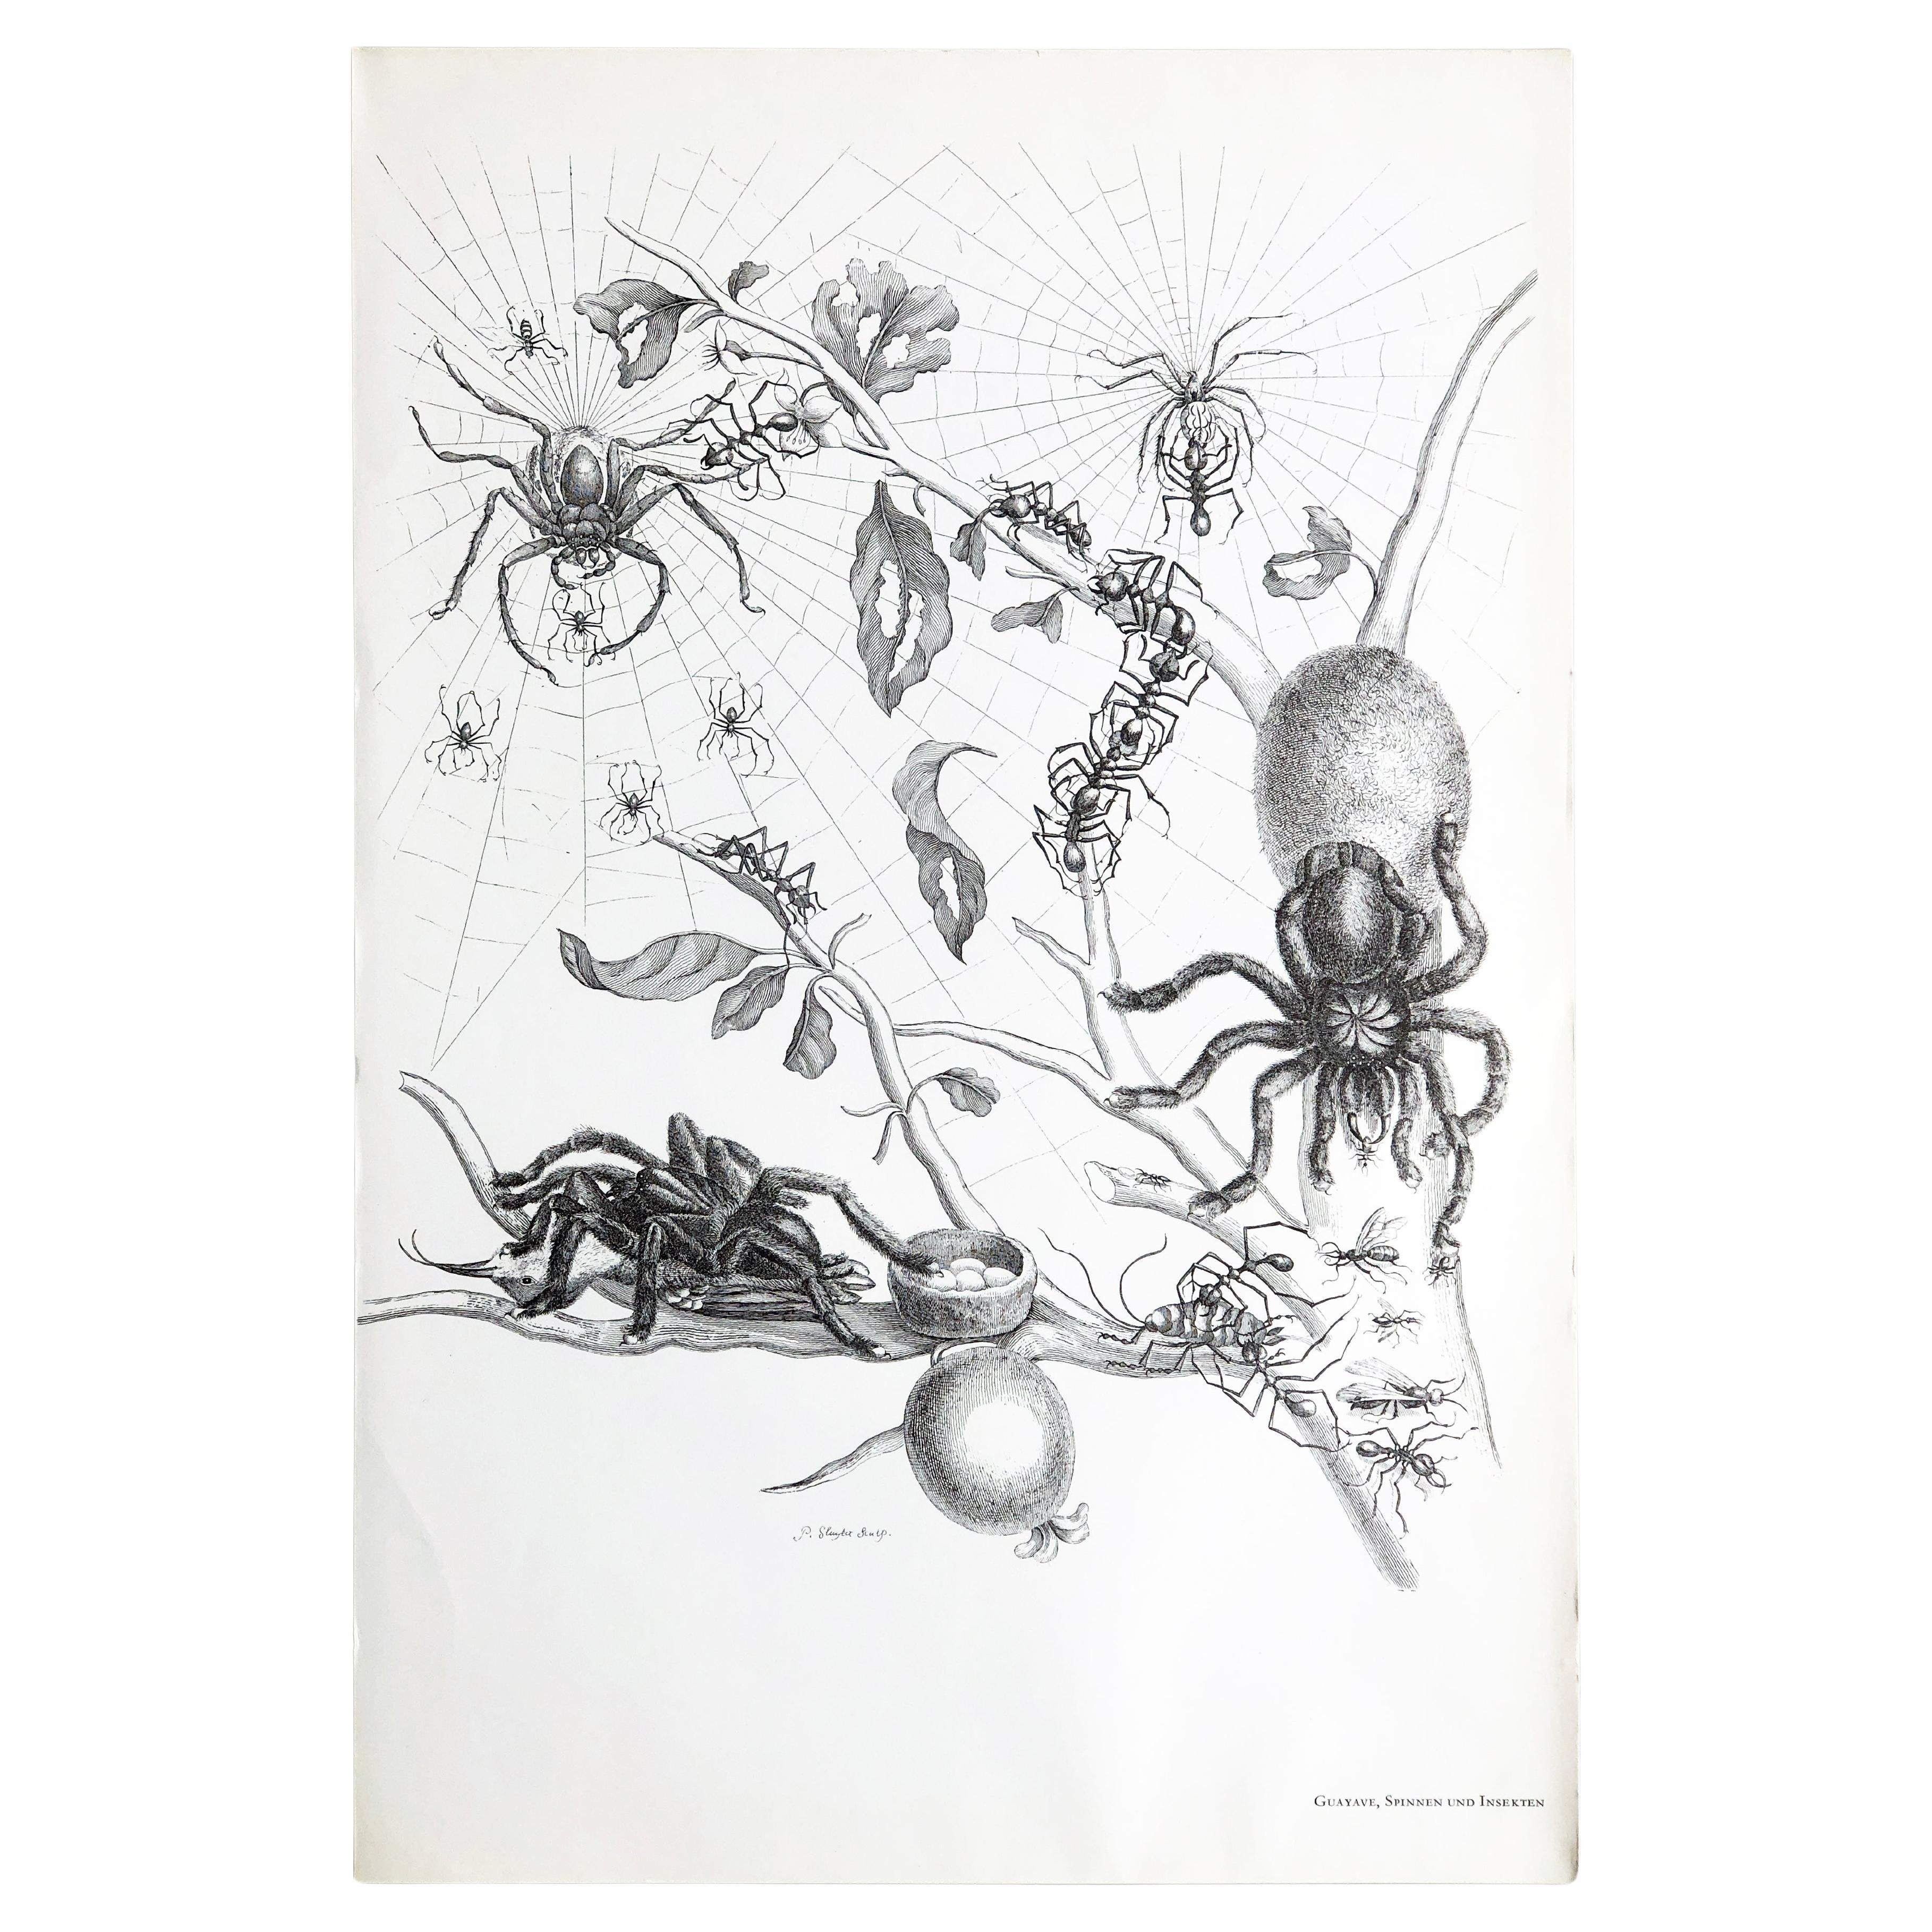 Maria Sibylla Merian - P. Sluyter Sculp - Guayave spiders and insects Nr.18